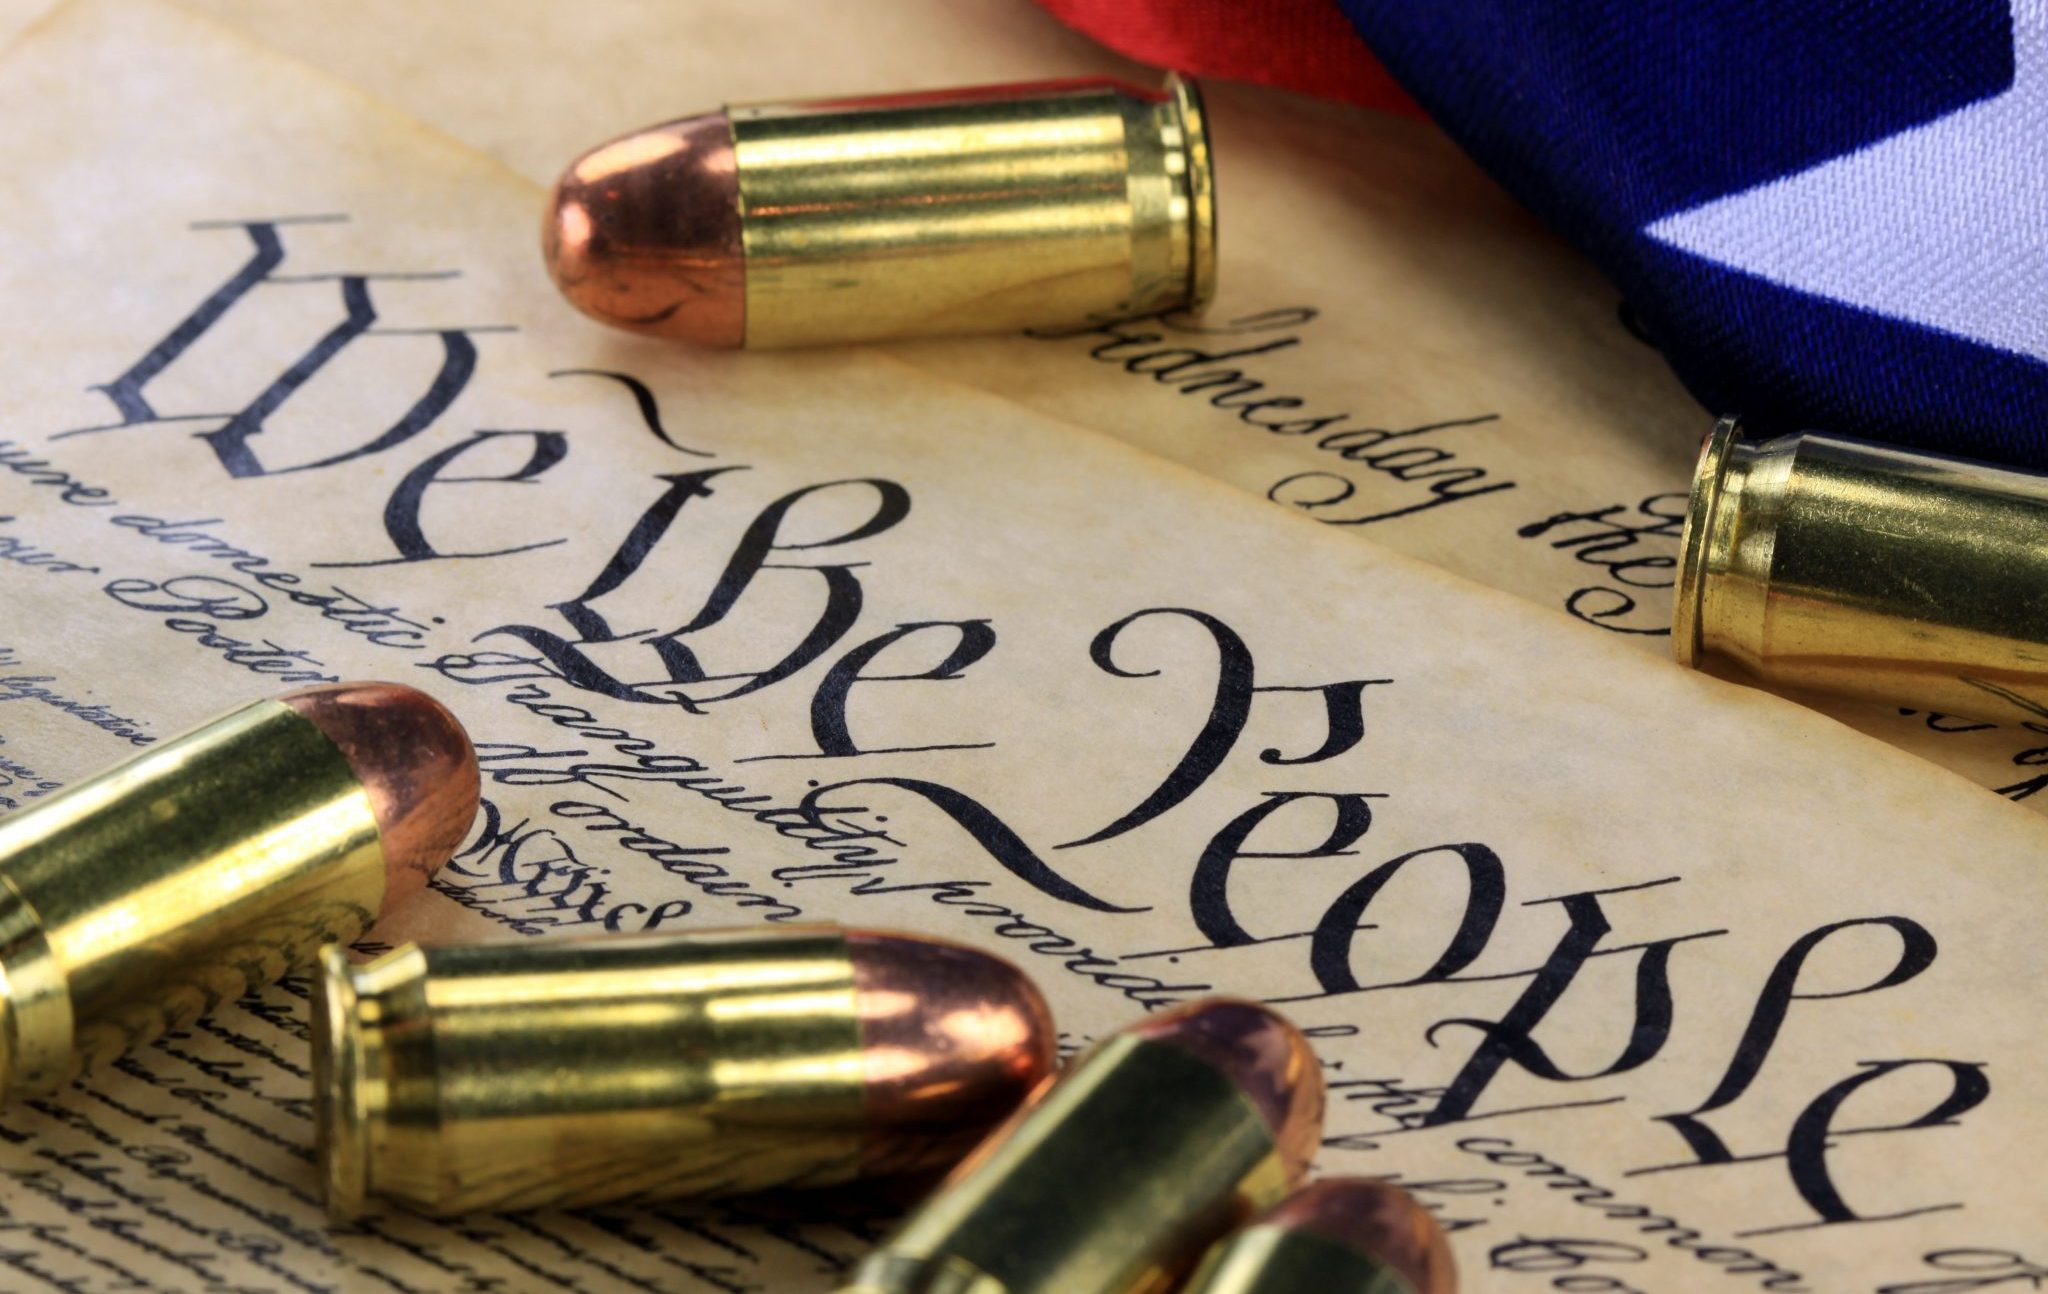 Ammunition,And,American,Flag,On,Us,Constitution,-,History,Of